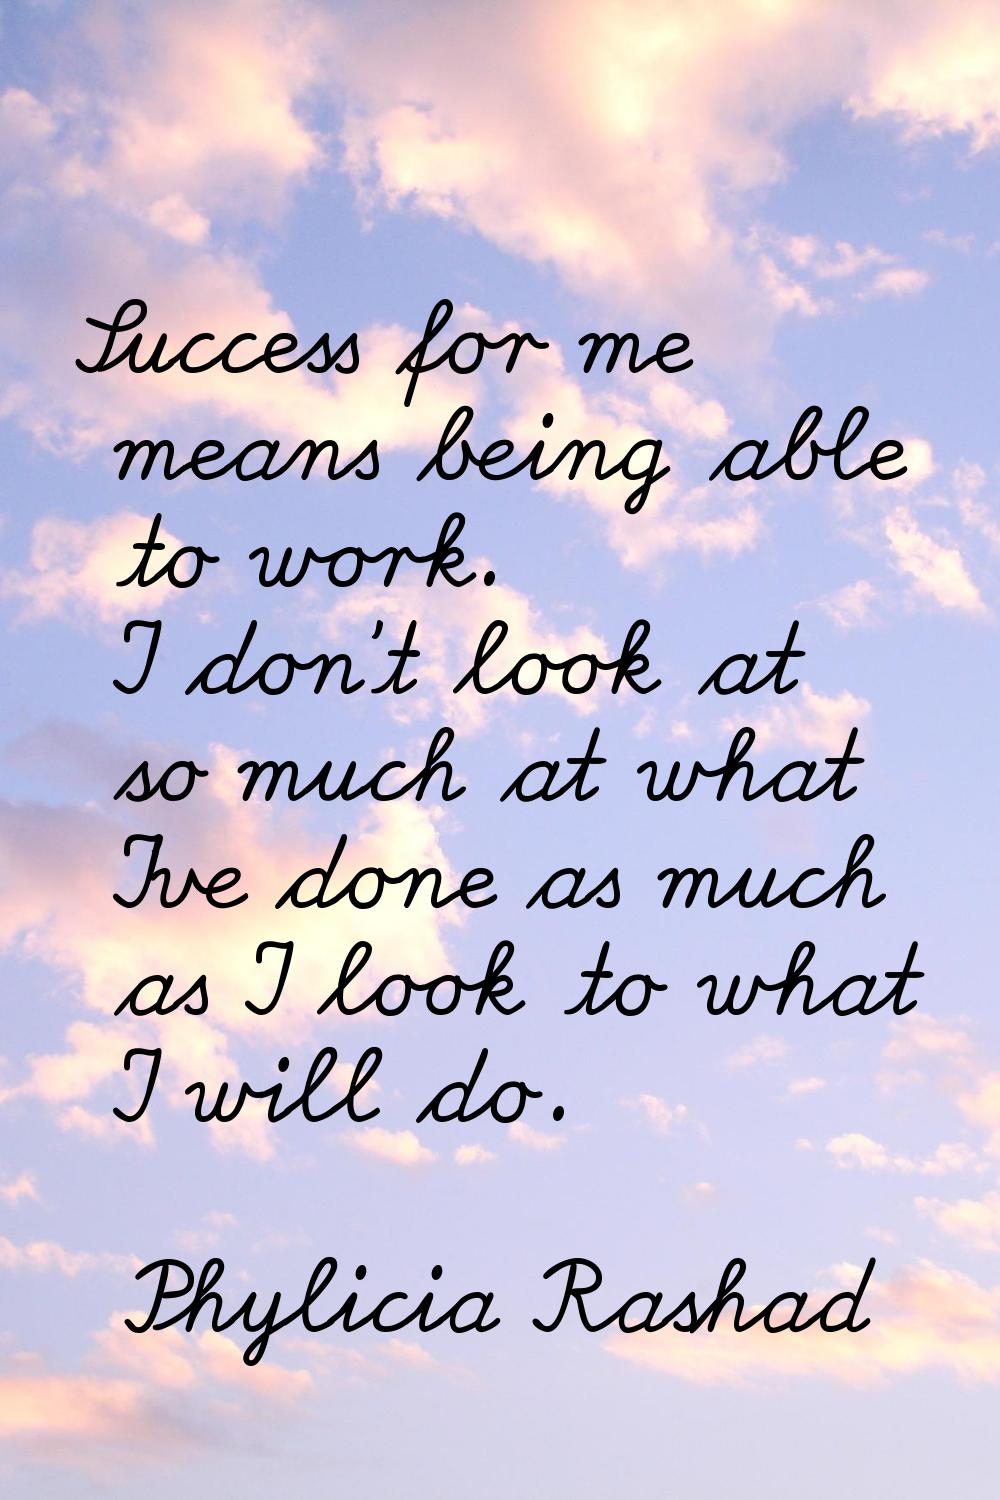 Success for me means being able to work. I don't look at so much at what I've done as much as I loo